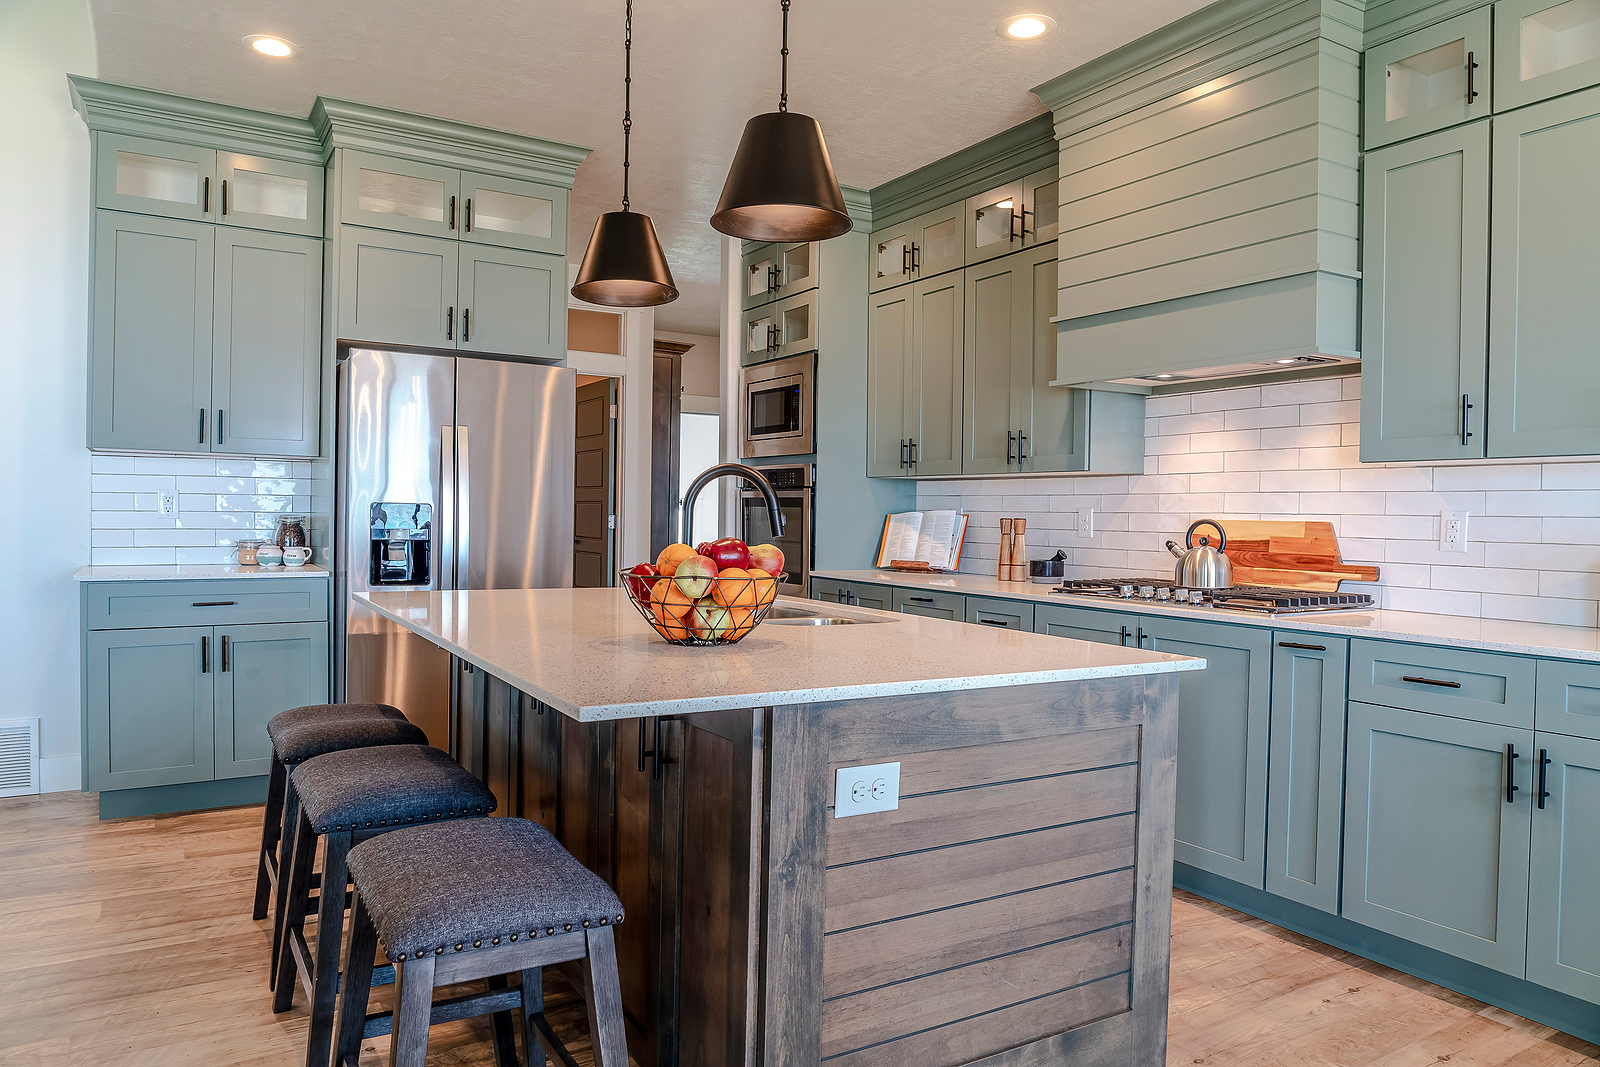 Kitchen Cabinet Color Trends For 2021, What Is The Best Color For Kitchen Cabinets In 2021